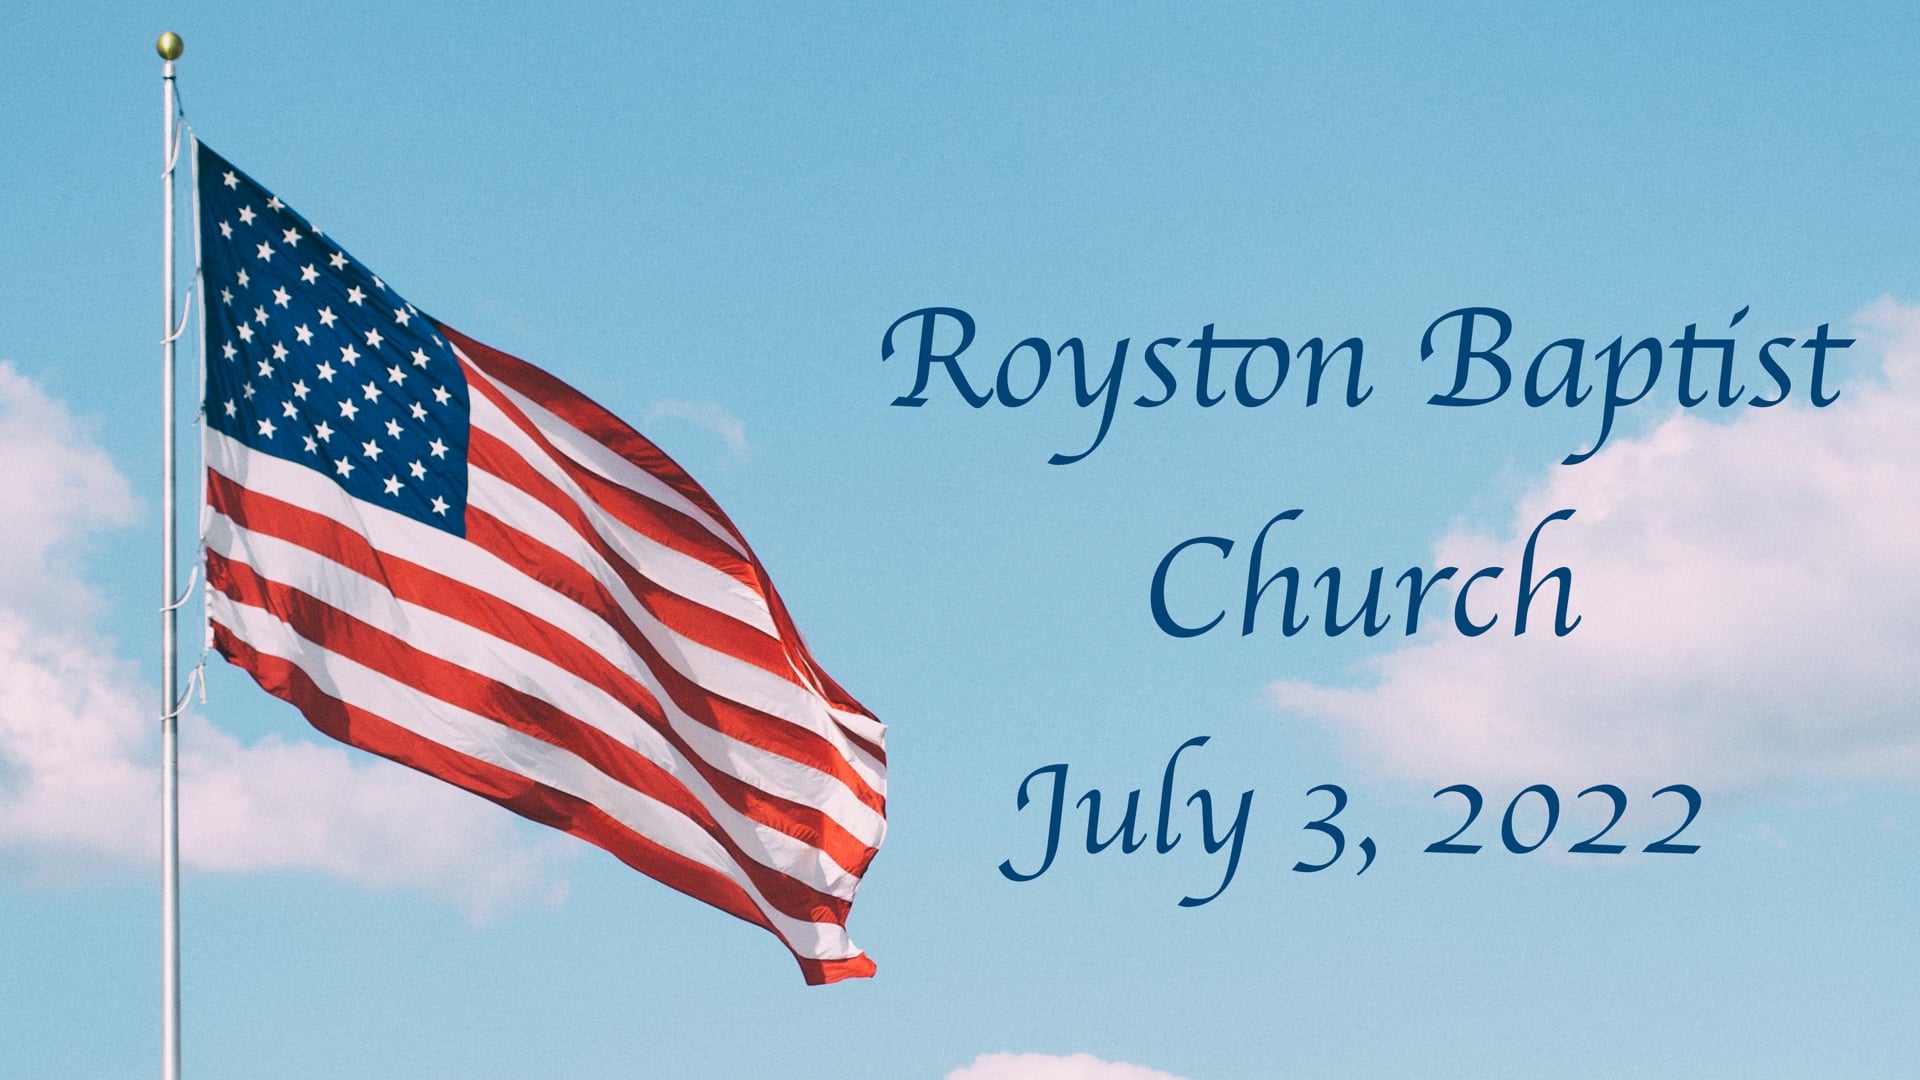 Royston Baptist Church 11 AM Worship Service Message for July 3, 2022